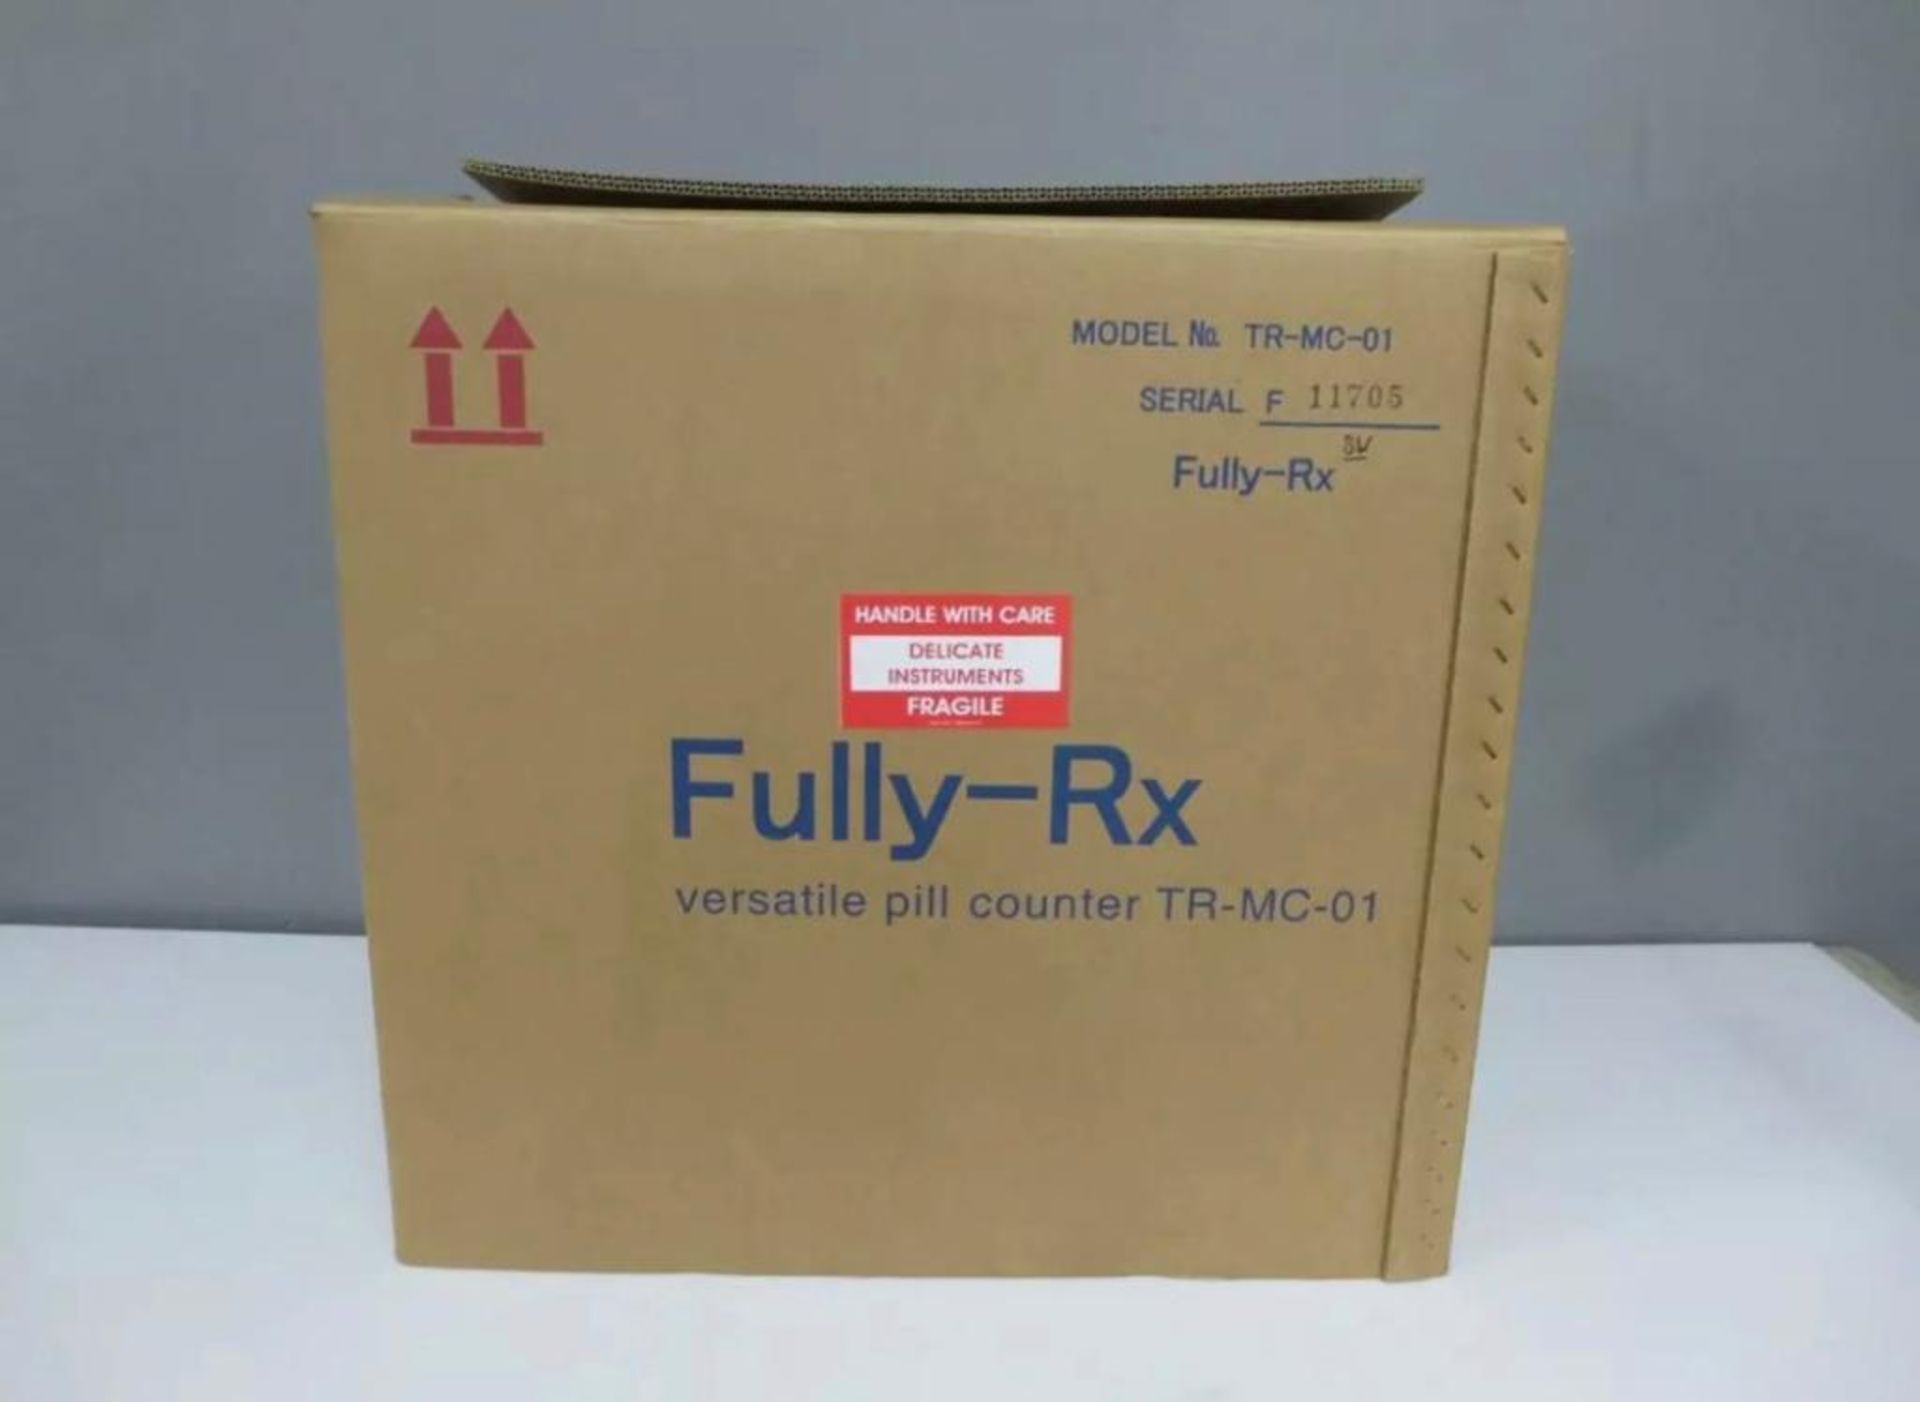 1000 NEW YUYAMA FULLY RX-VERSATILE PILL CAPSULE COUNTERS - MODEL TR-MC-01 - Image 9 of 10